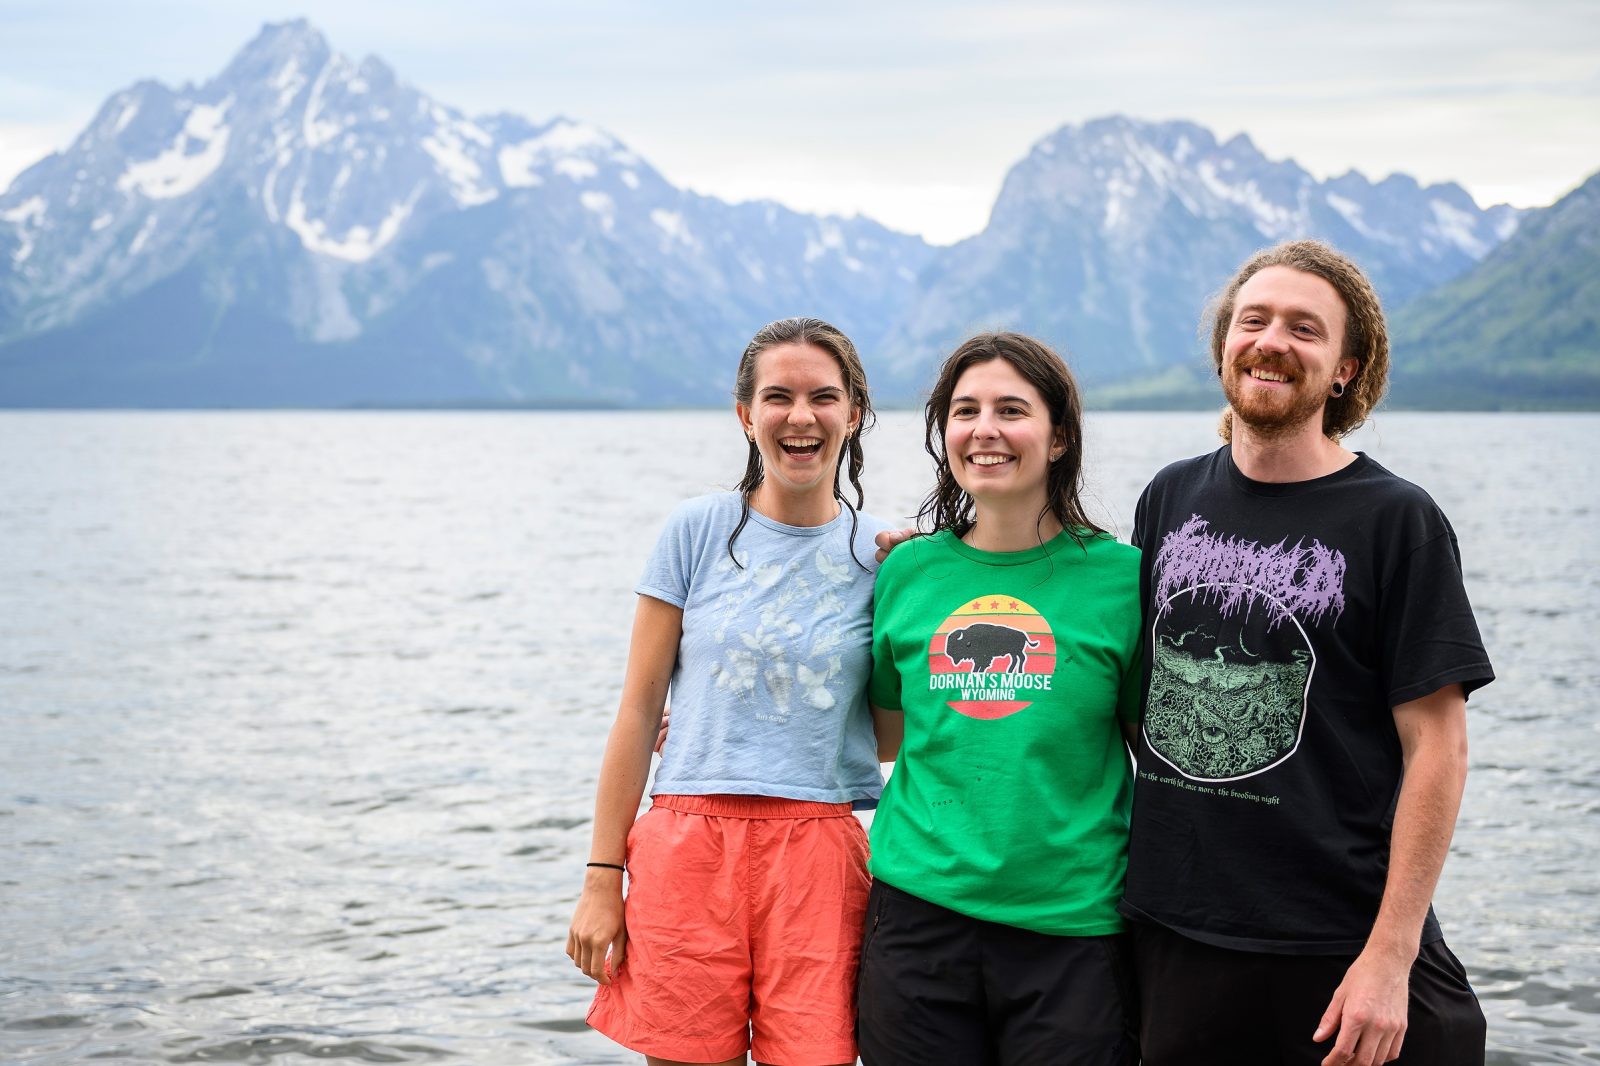 Lucy McGuire, Arielle Link and Timon Keller stand shoulder to shoulder smiling and laughing in front of the calm blue waters of Jackson Lake. The Teton Mountains rise up dramatically behind them speckled by patches of snow.